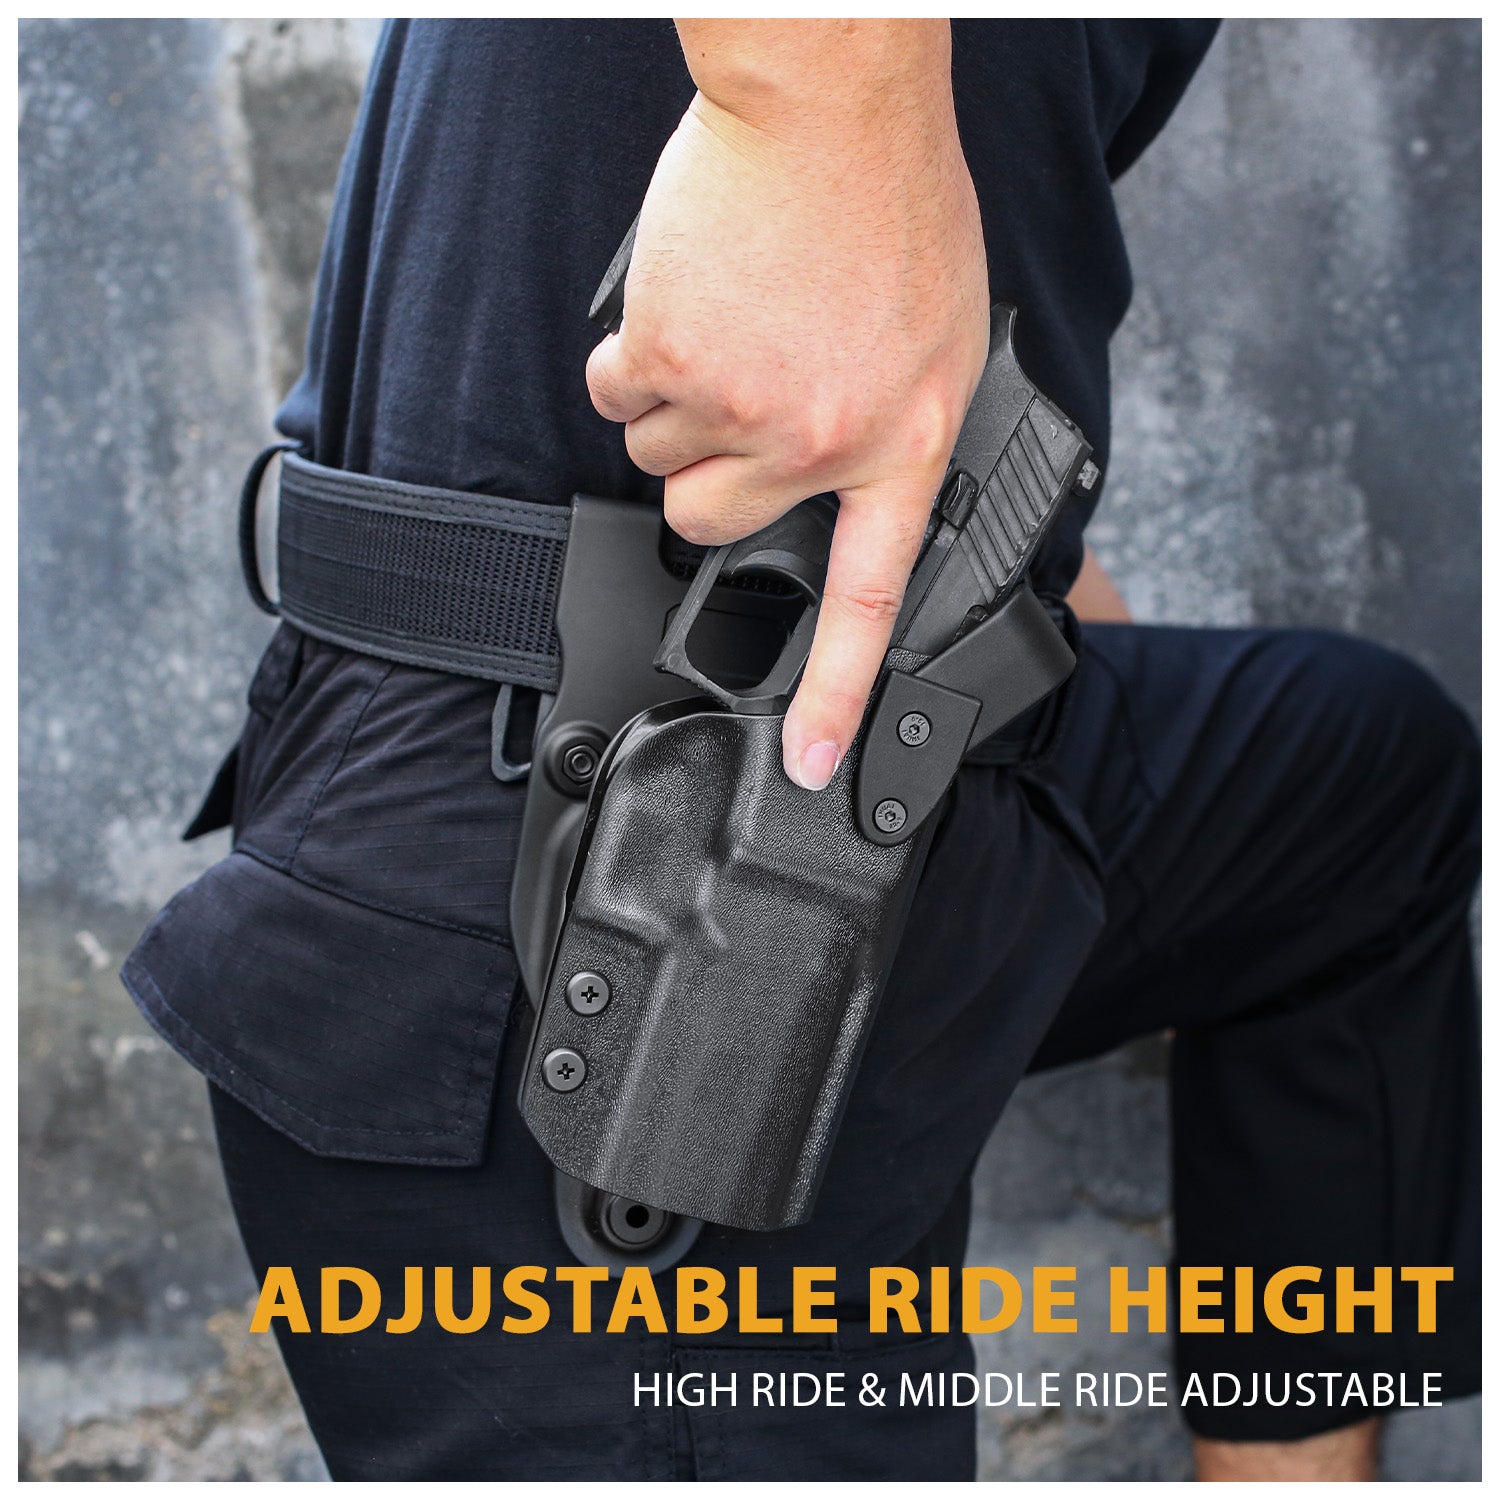 P320 Duty Holster Level II Retention w/Hook Guard & Rotating Hood: Sig Sauer P320 Compact M18, Outside Waistband Holster Sig P320, Adj. Retention & Ride Height, Right|WARRIORLAND